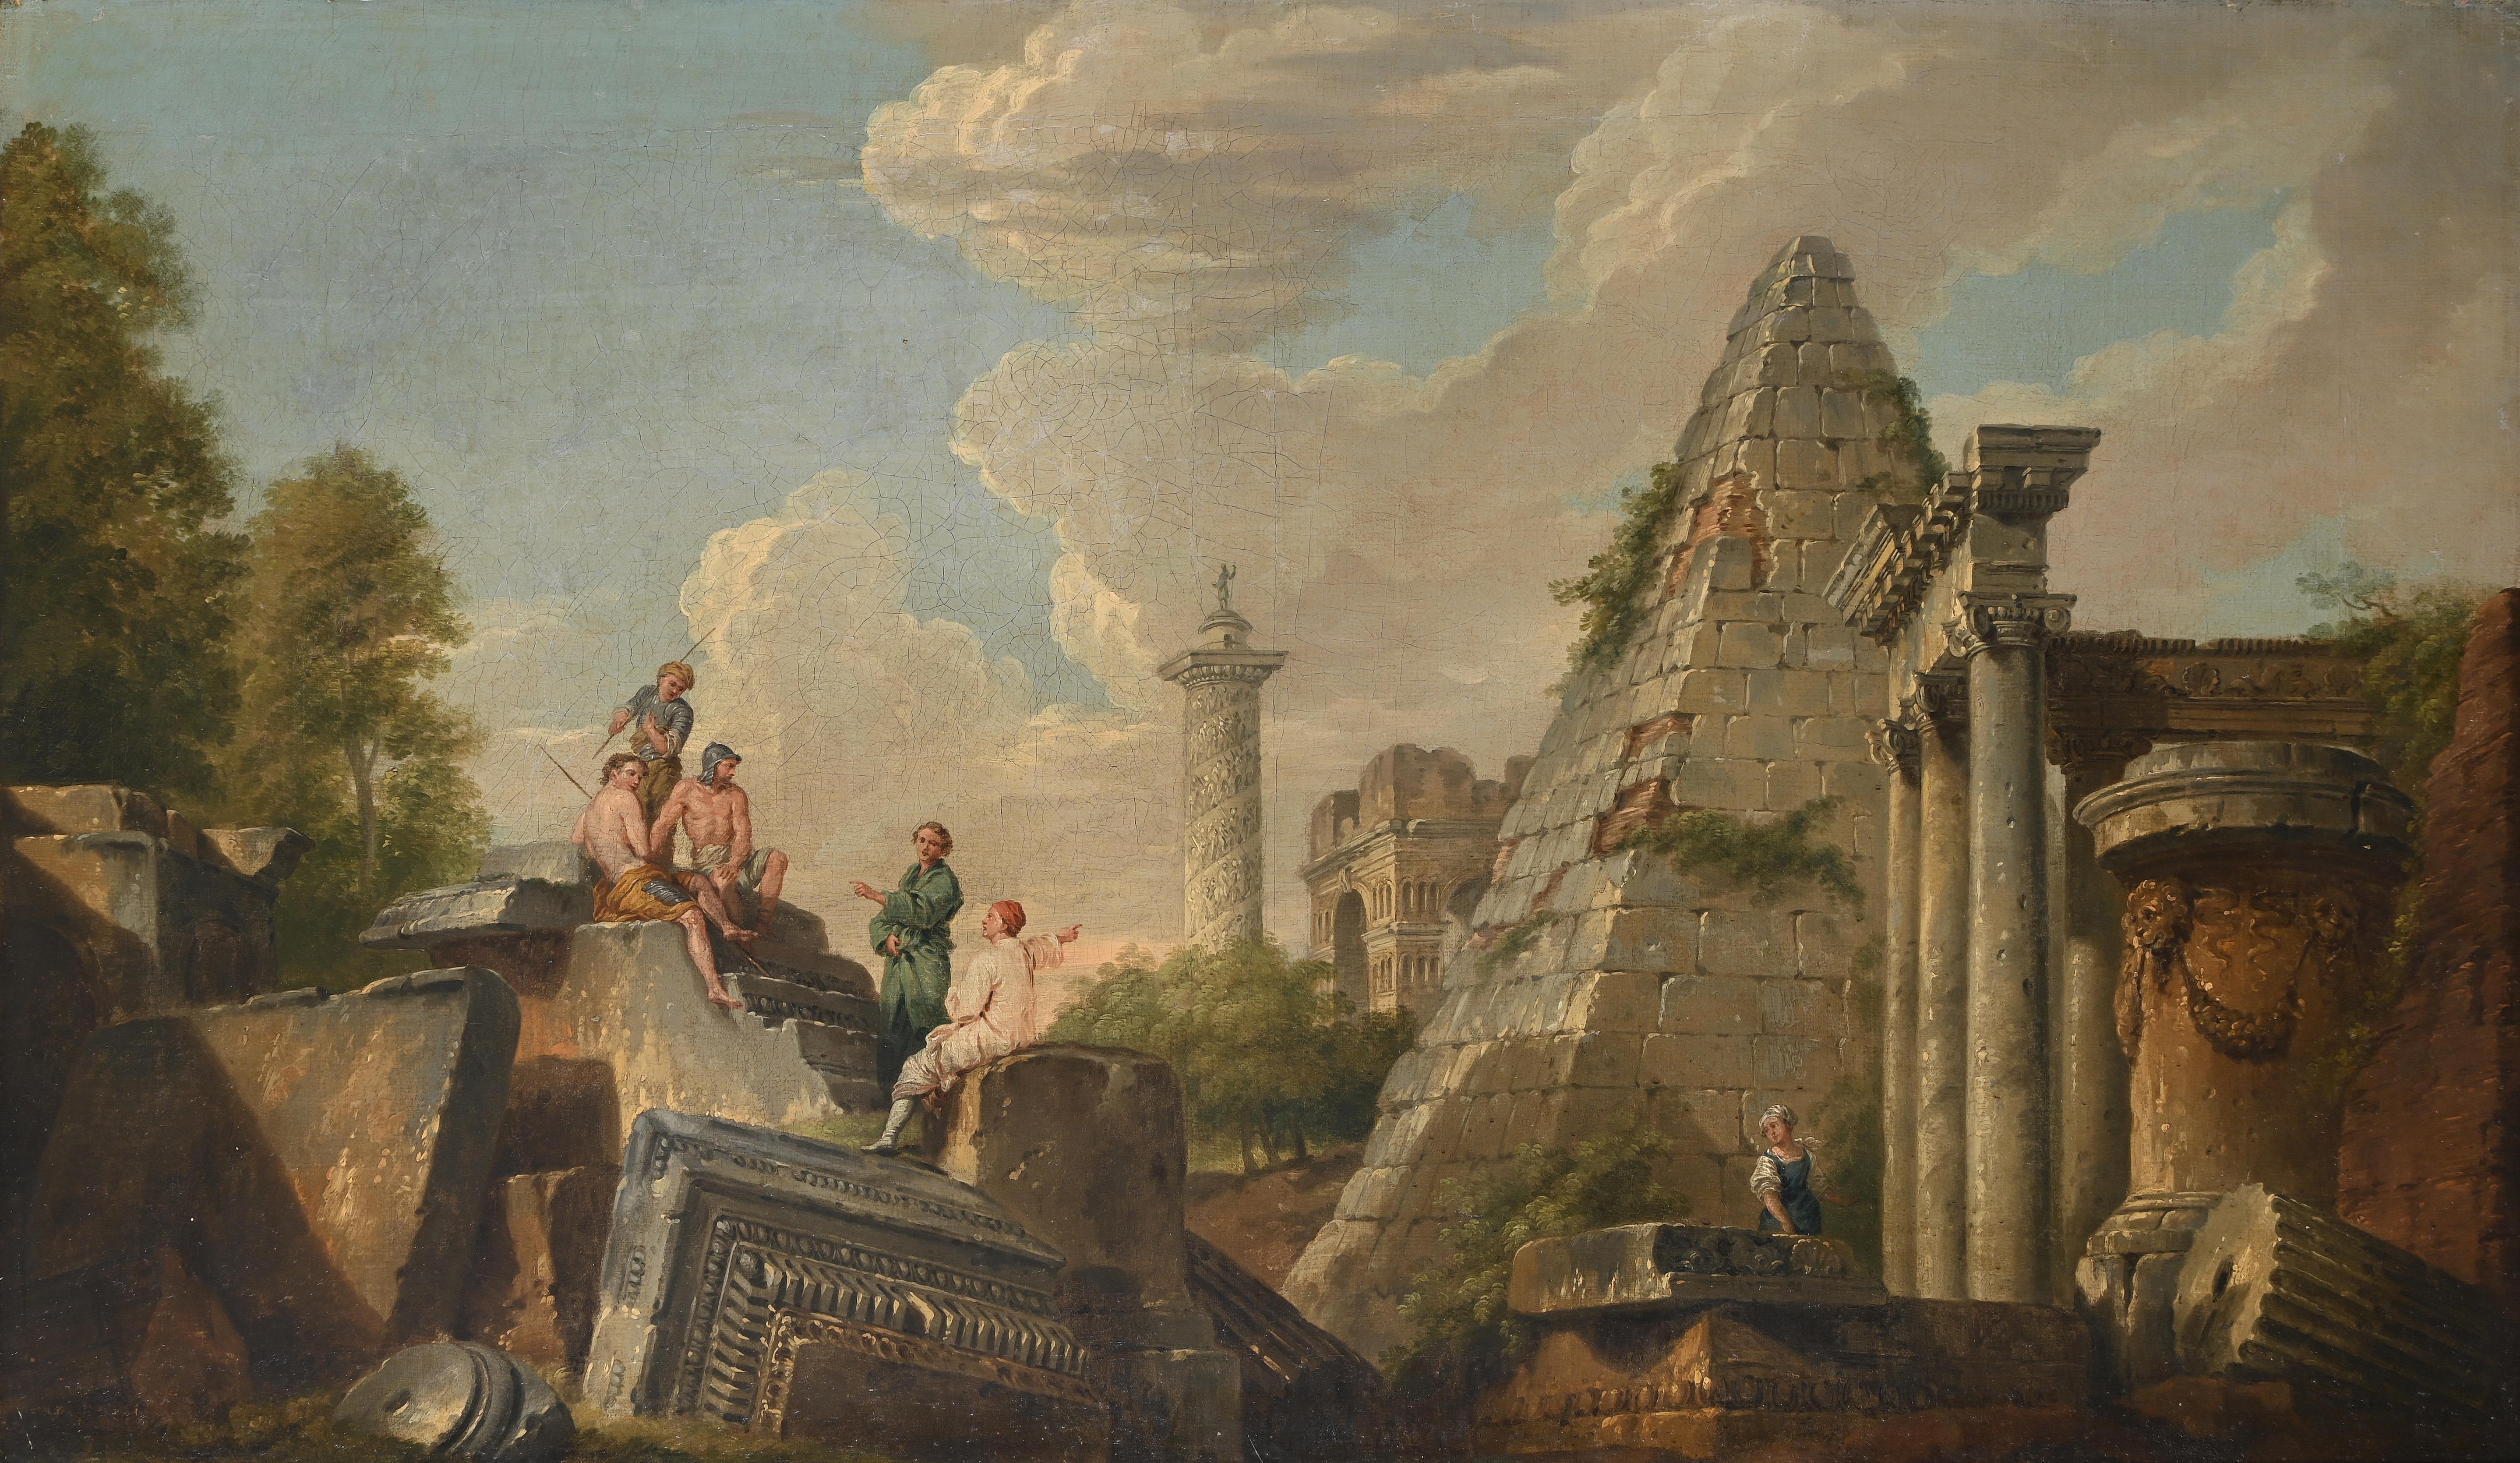 A pair of 18th century Italian landscapes with classical ruins and figures - Painting by Giovanni Paolo Panini